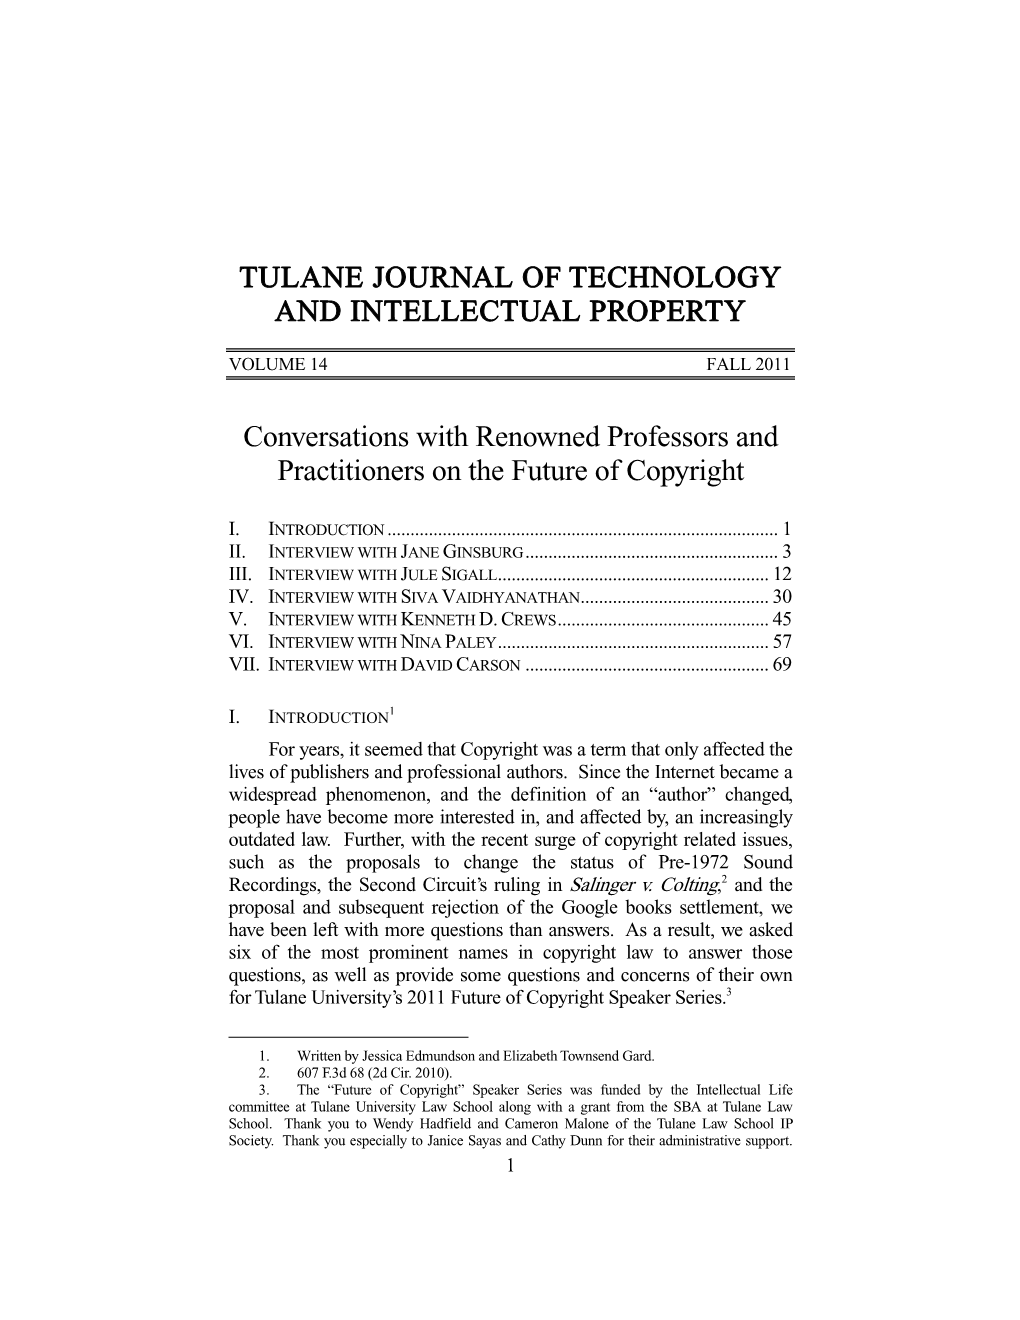 Tulane Journal of Technology and Intellectual Property